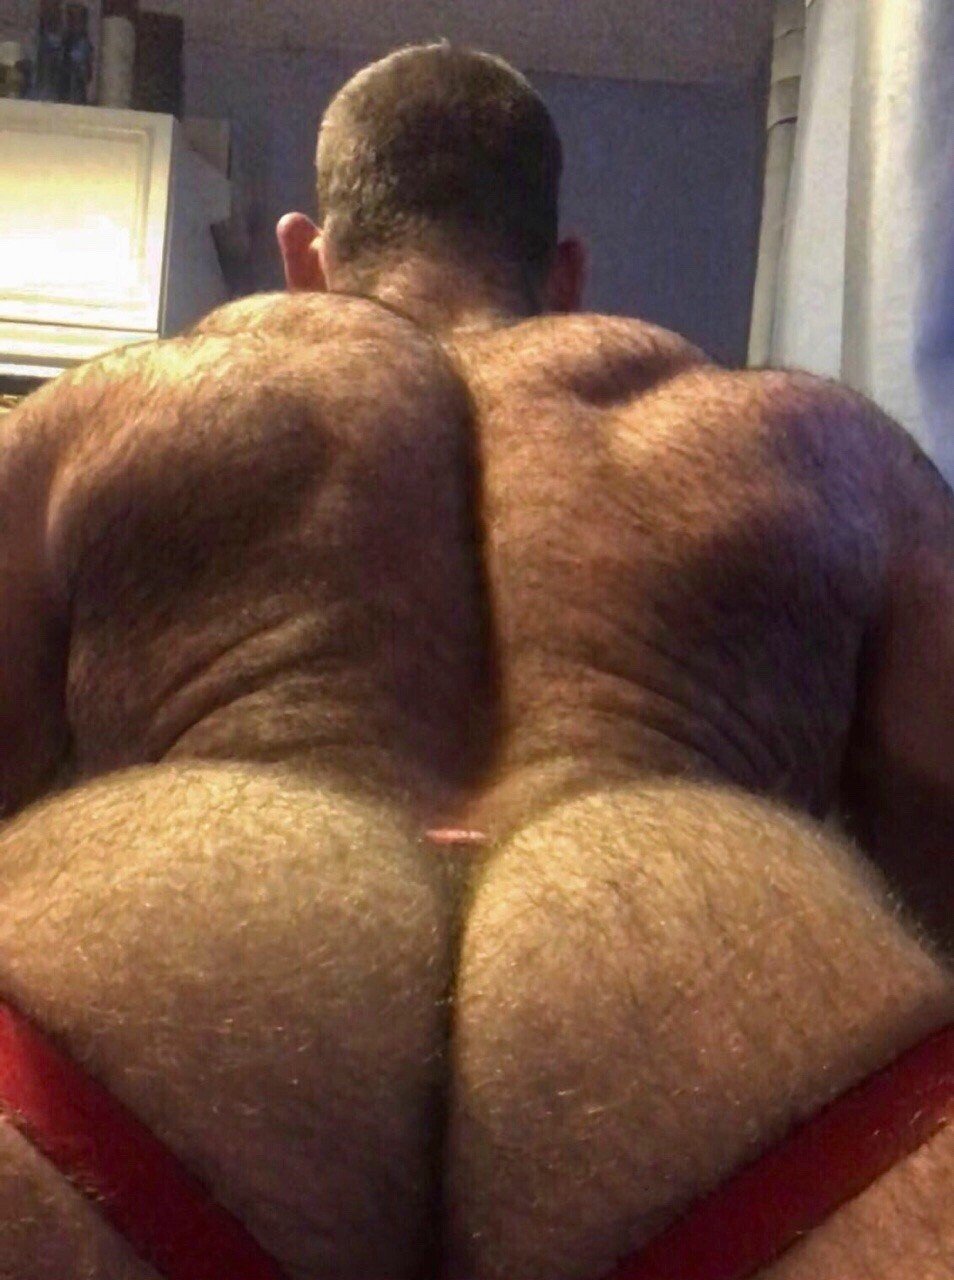 Photo by Smitty with the username @Resol702,  January 12, 2019 at 4:43 AM. The post is about the topic Hairy butt